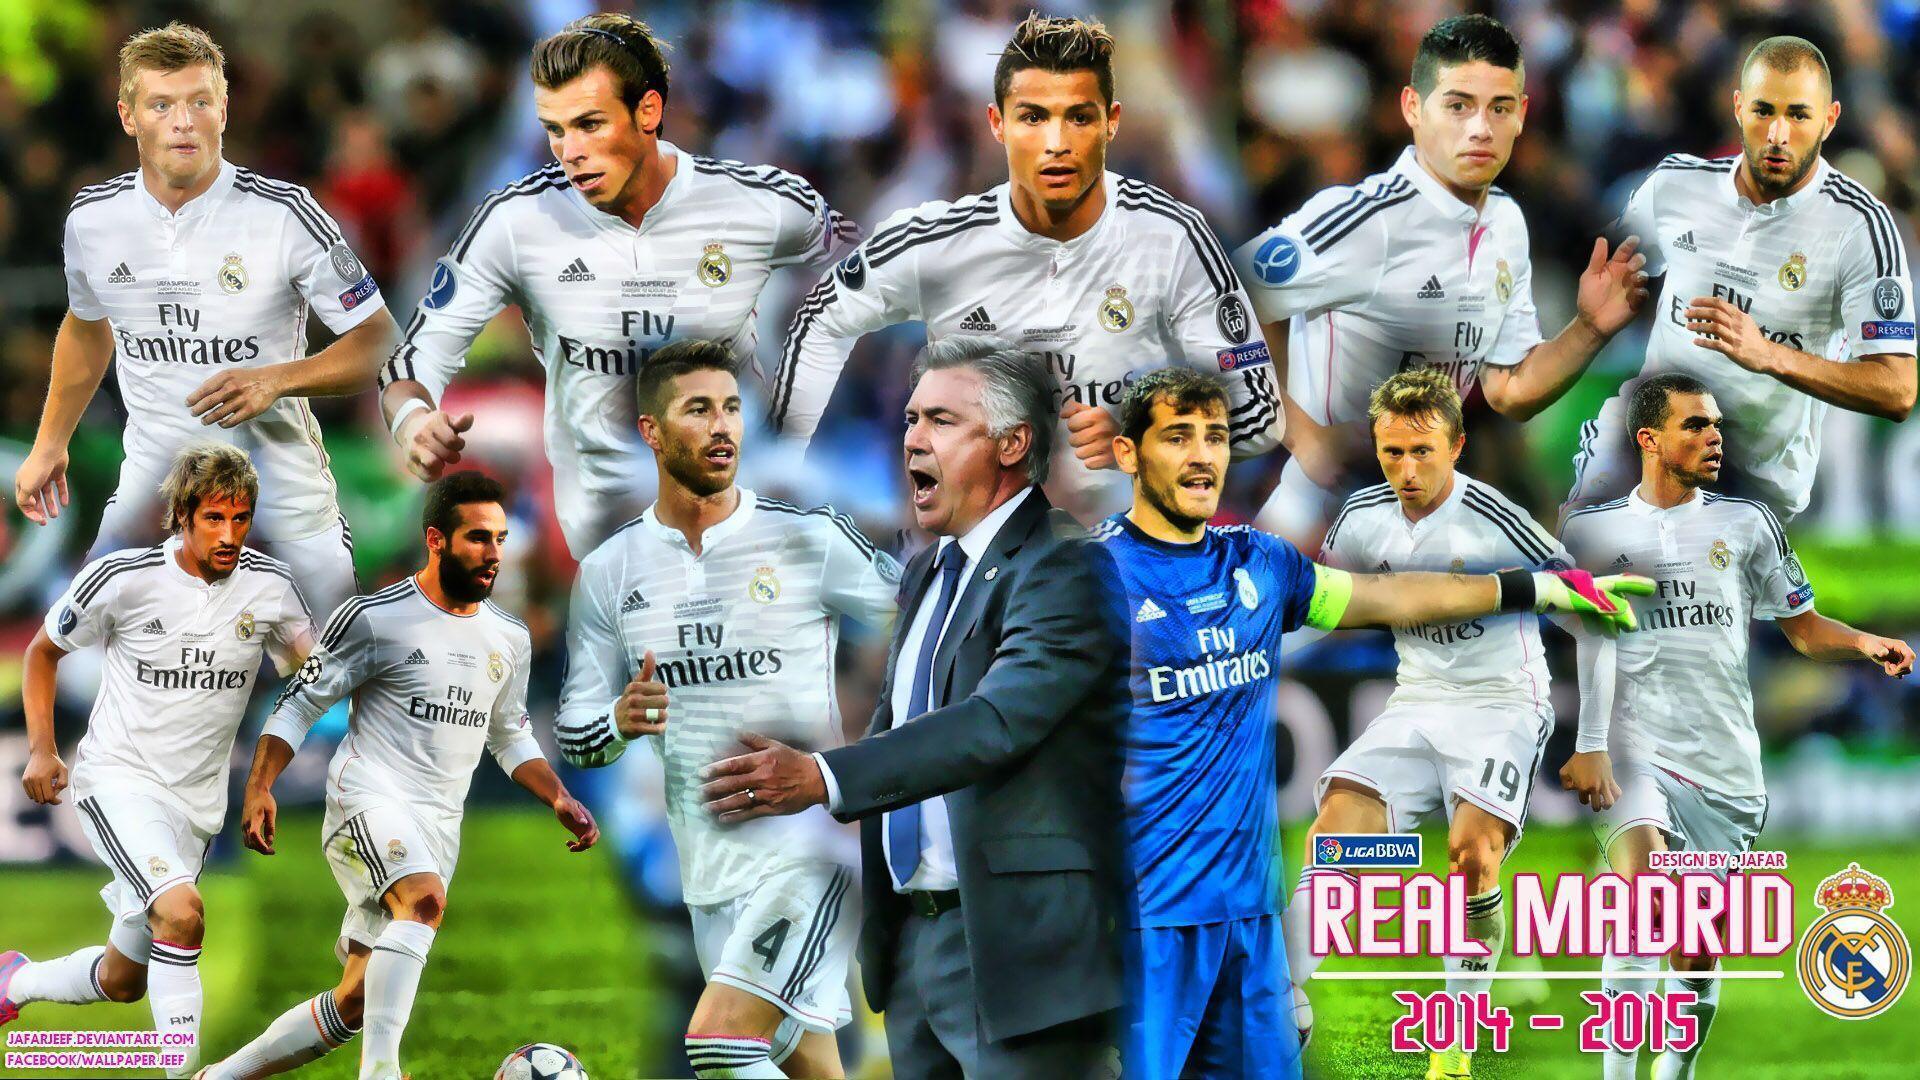 Real Madrid CF 2014 2015 First Team Squad Wallpaper Wide Or HD